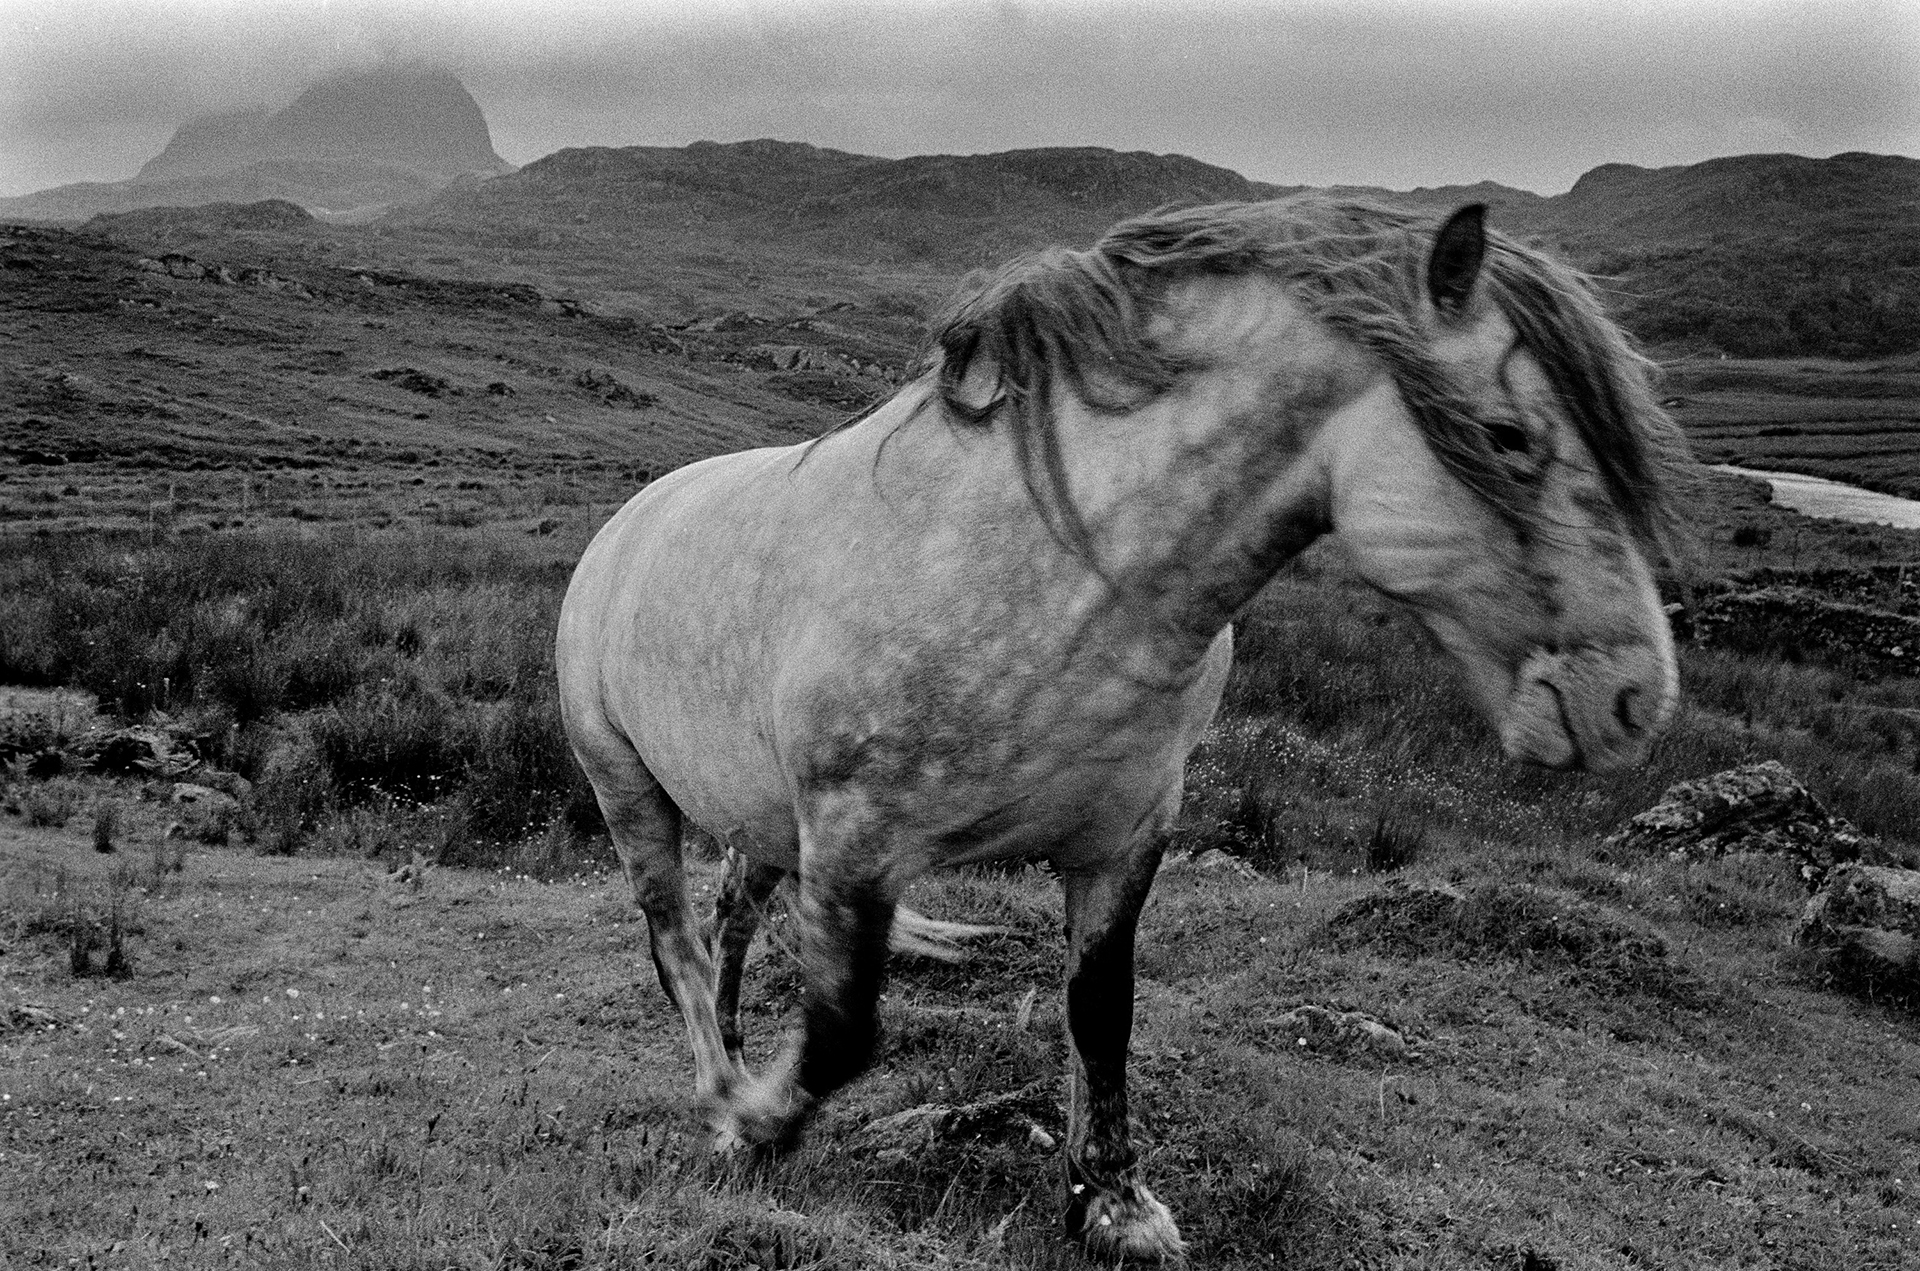 Image of Suilven Stalking Pony by Glyn Satterley